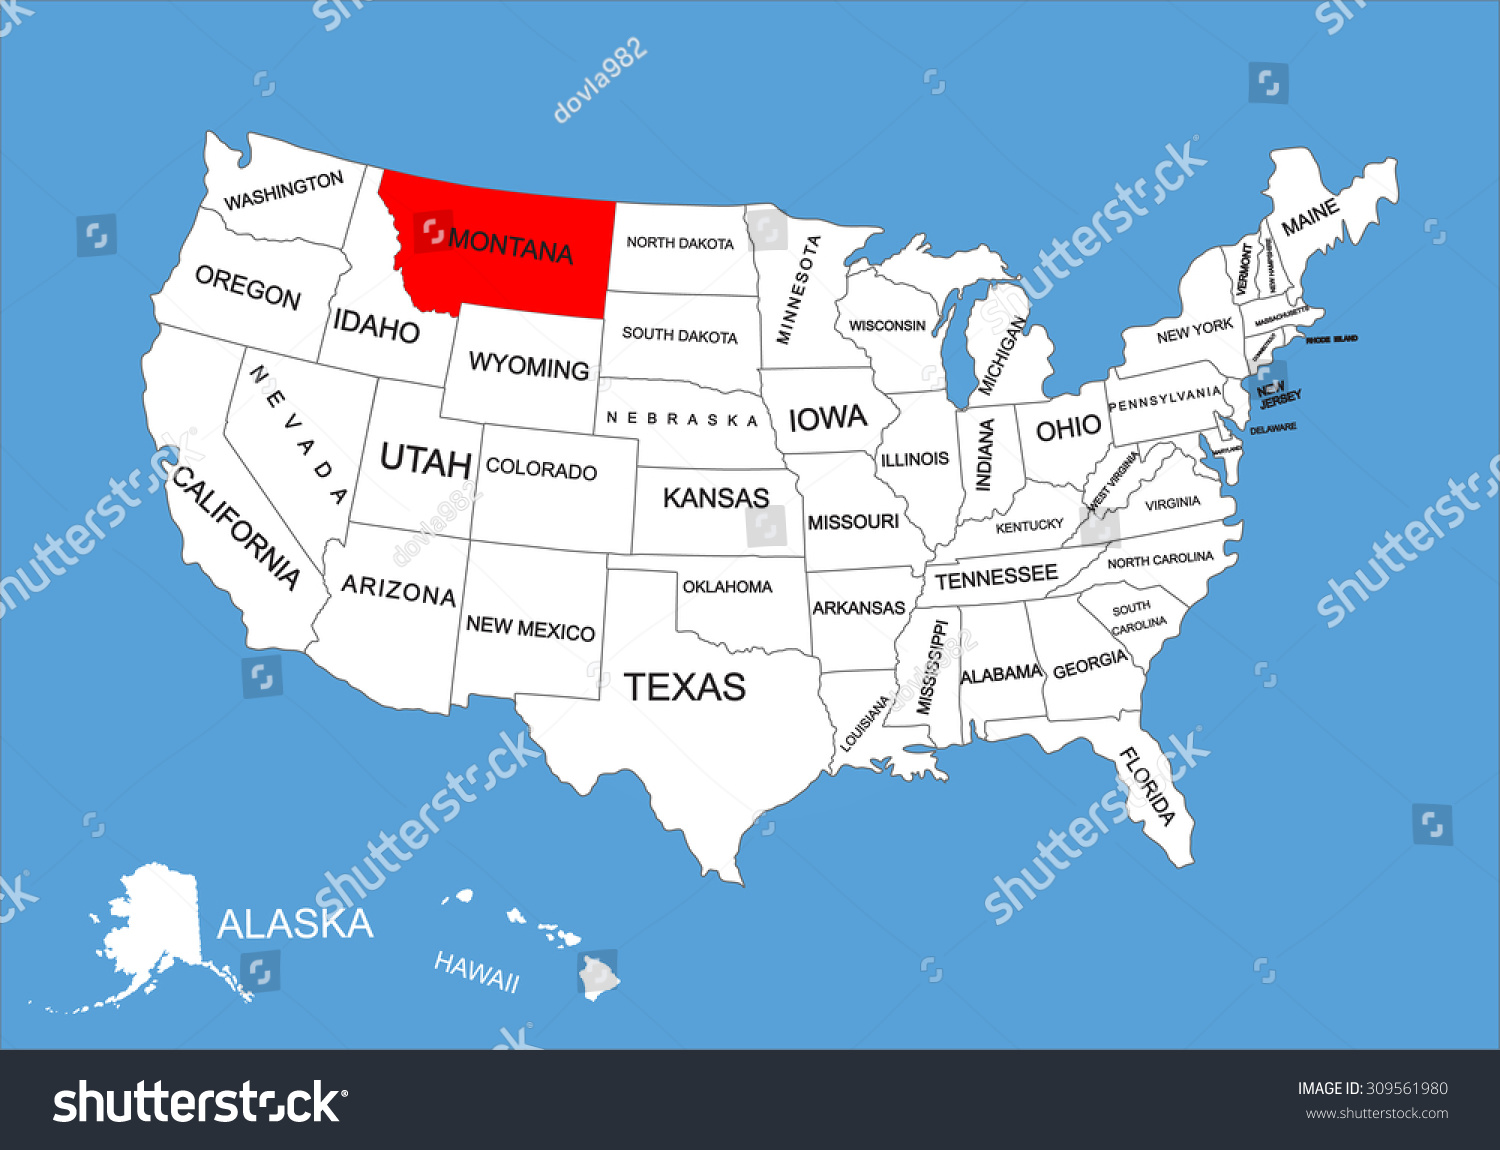 Montana State Usa Vector Map Isolated Stock Vector Royalty Free